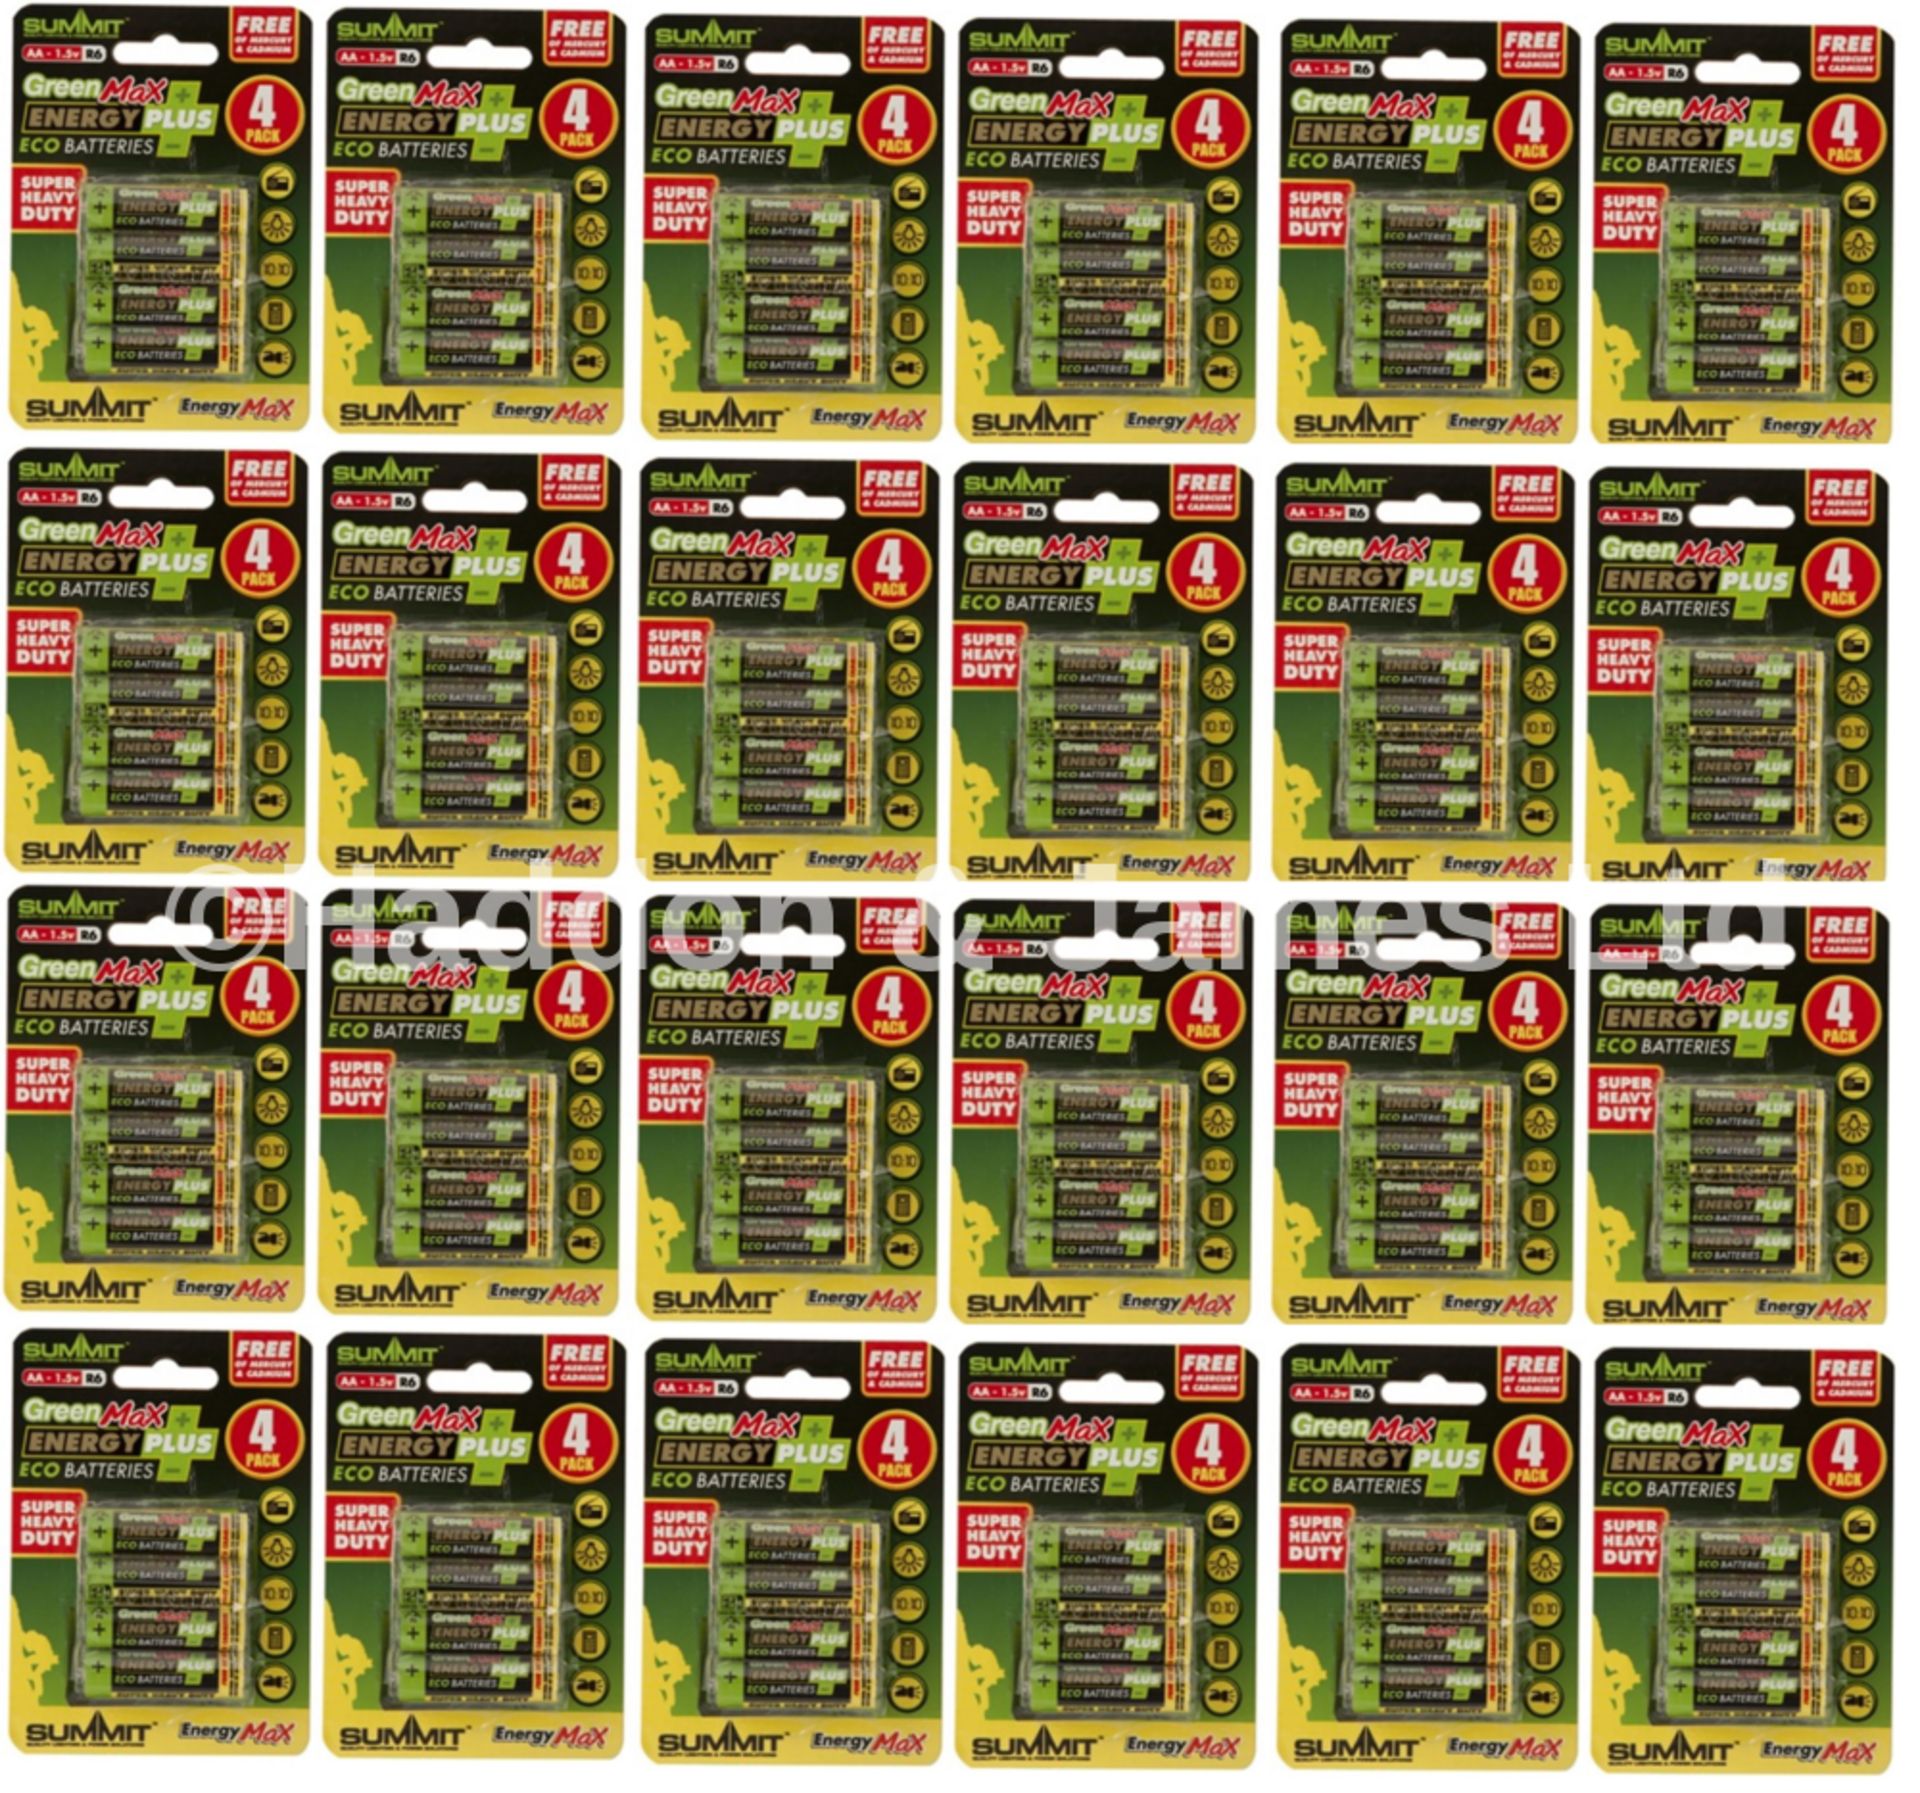 V *TRADE QTY* Brand New Ninety Six Energy Plus Batteries (24 Cards Of 4) X 6 YOUR BID PRICE TO BE